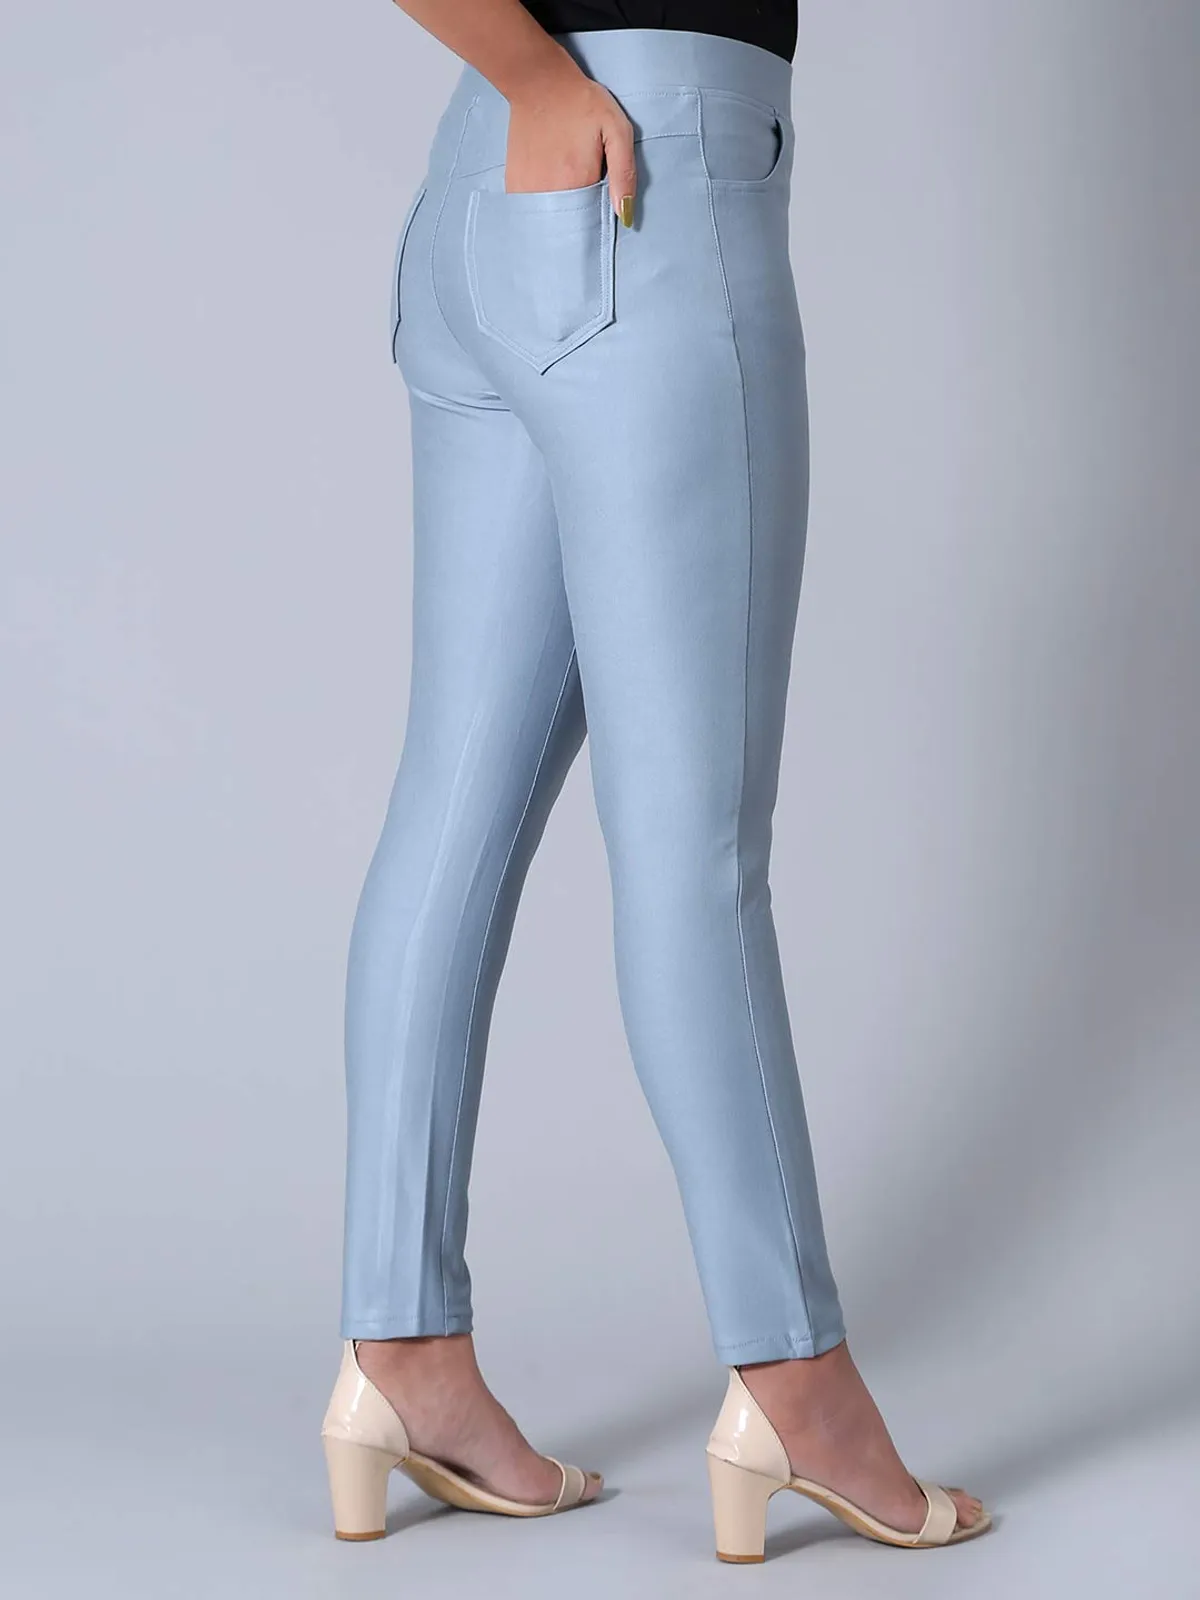 Blue solid cotton jeggings